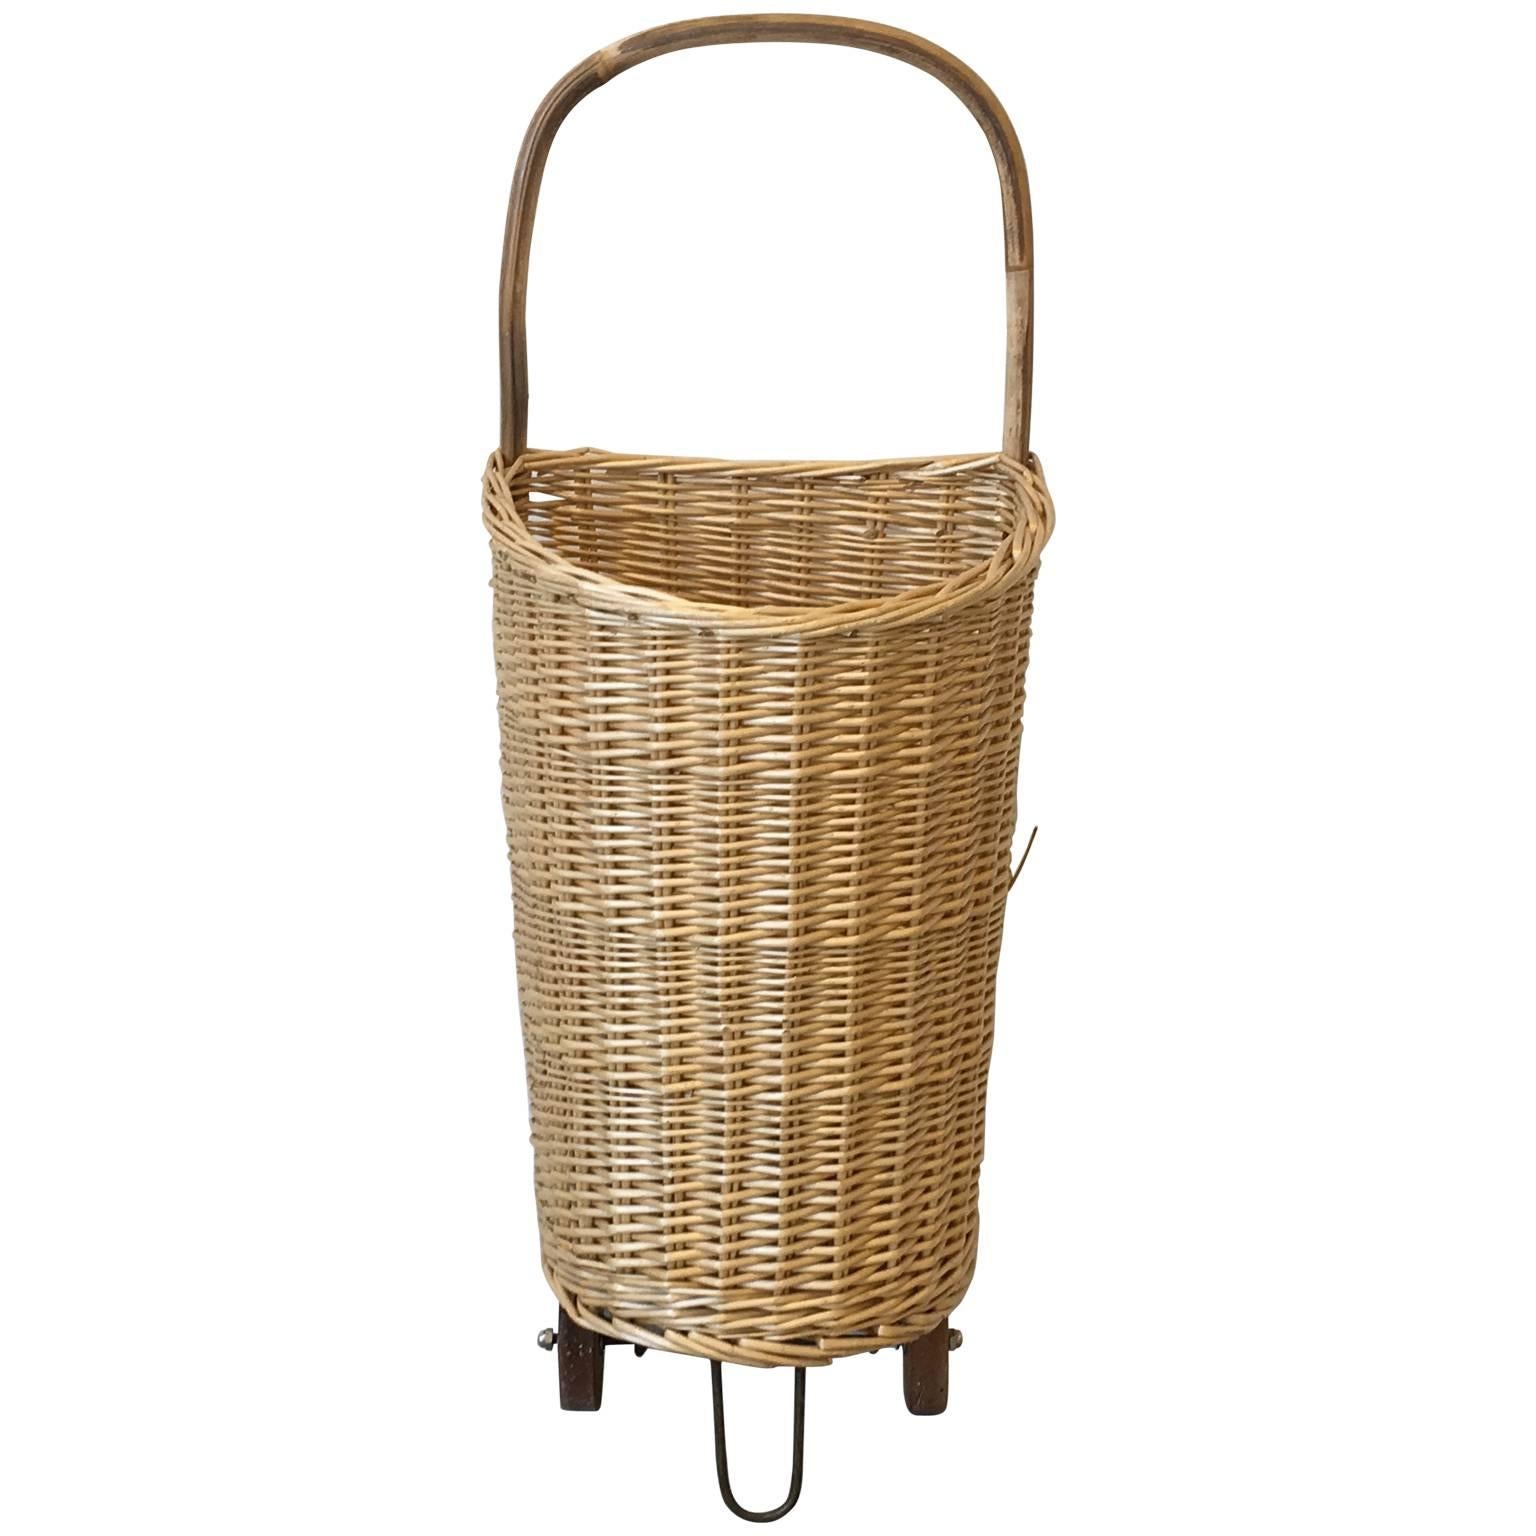 1960s English Market Cart Umbrella Stand with Wicker Basket and Bamboo Handle